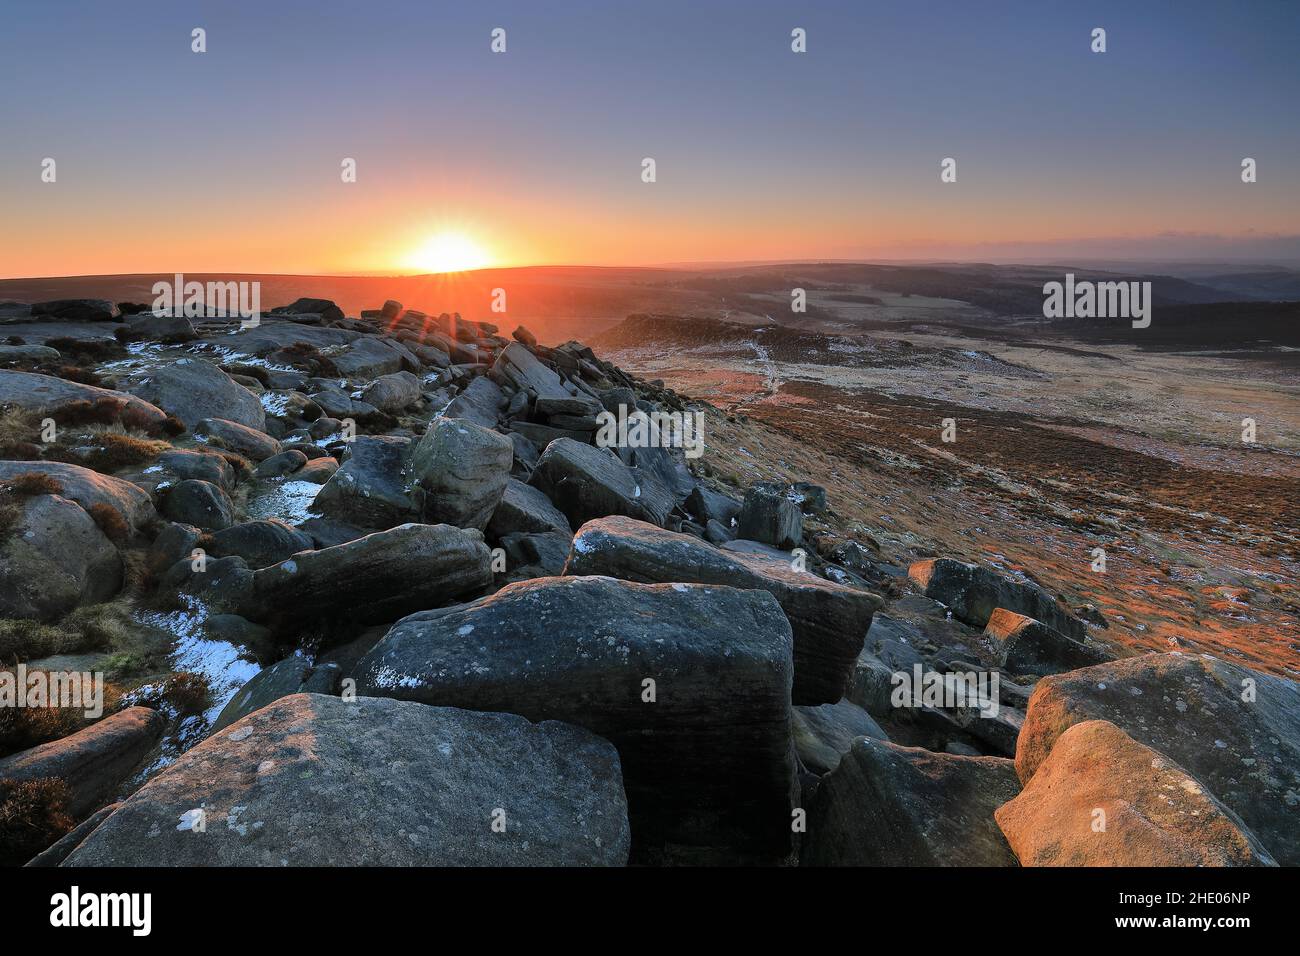 The view from Higger Tor on Hathersage Moor in the Peak District National Park, South Yorkshir, England Stock Photo